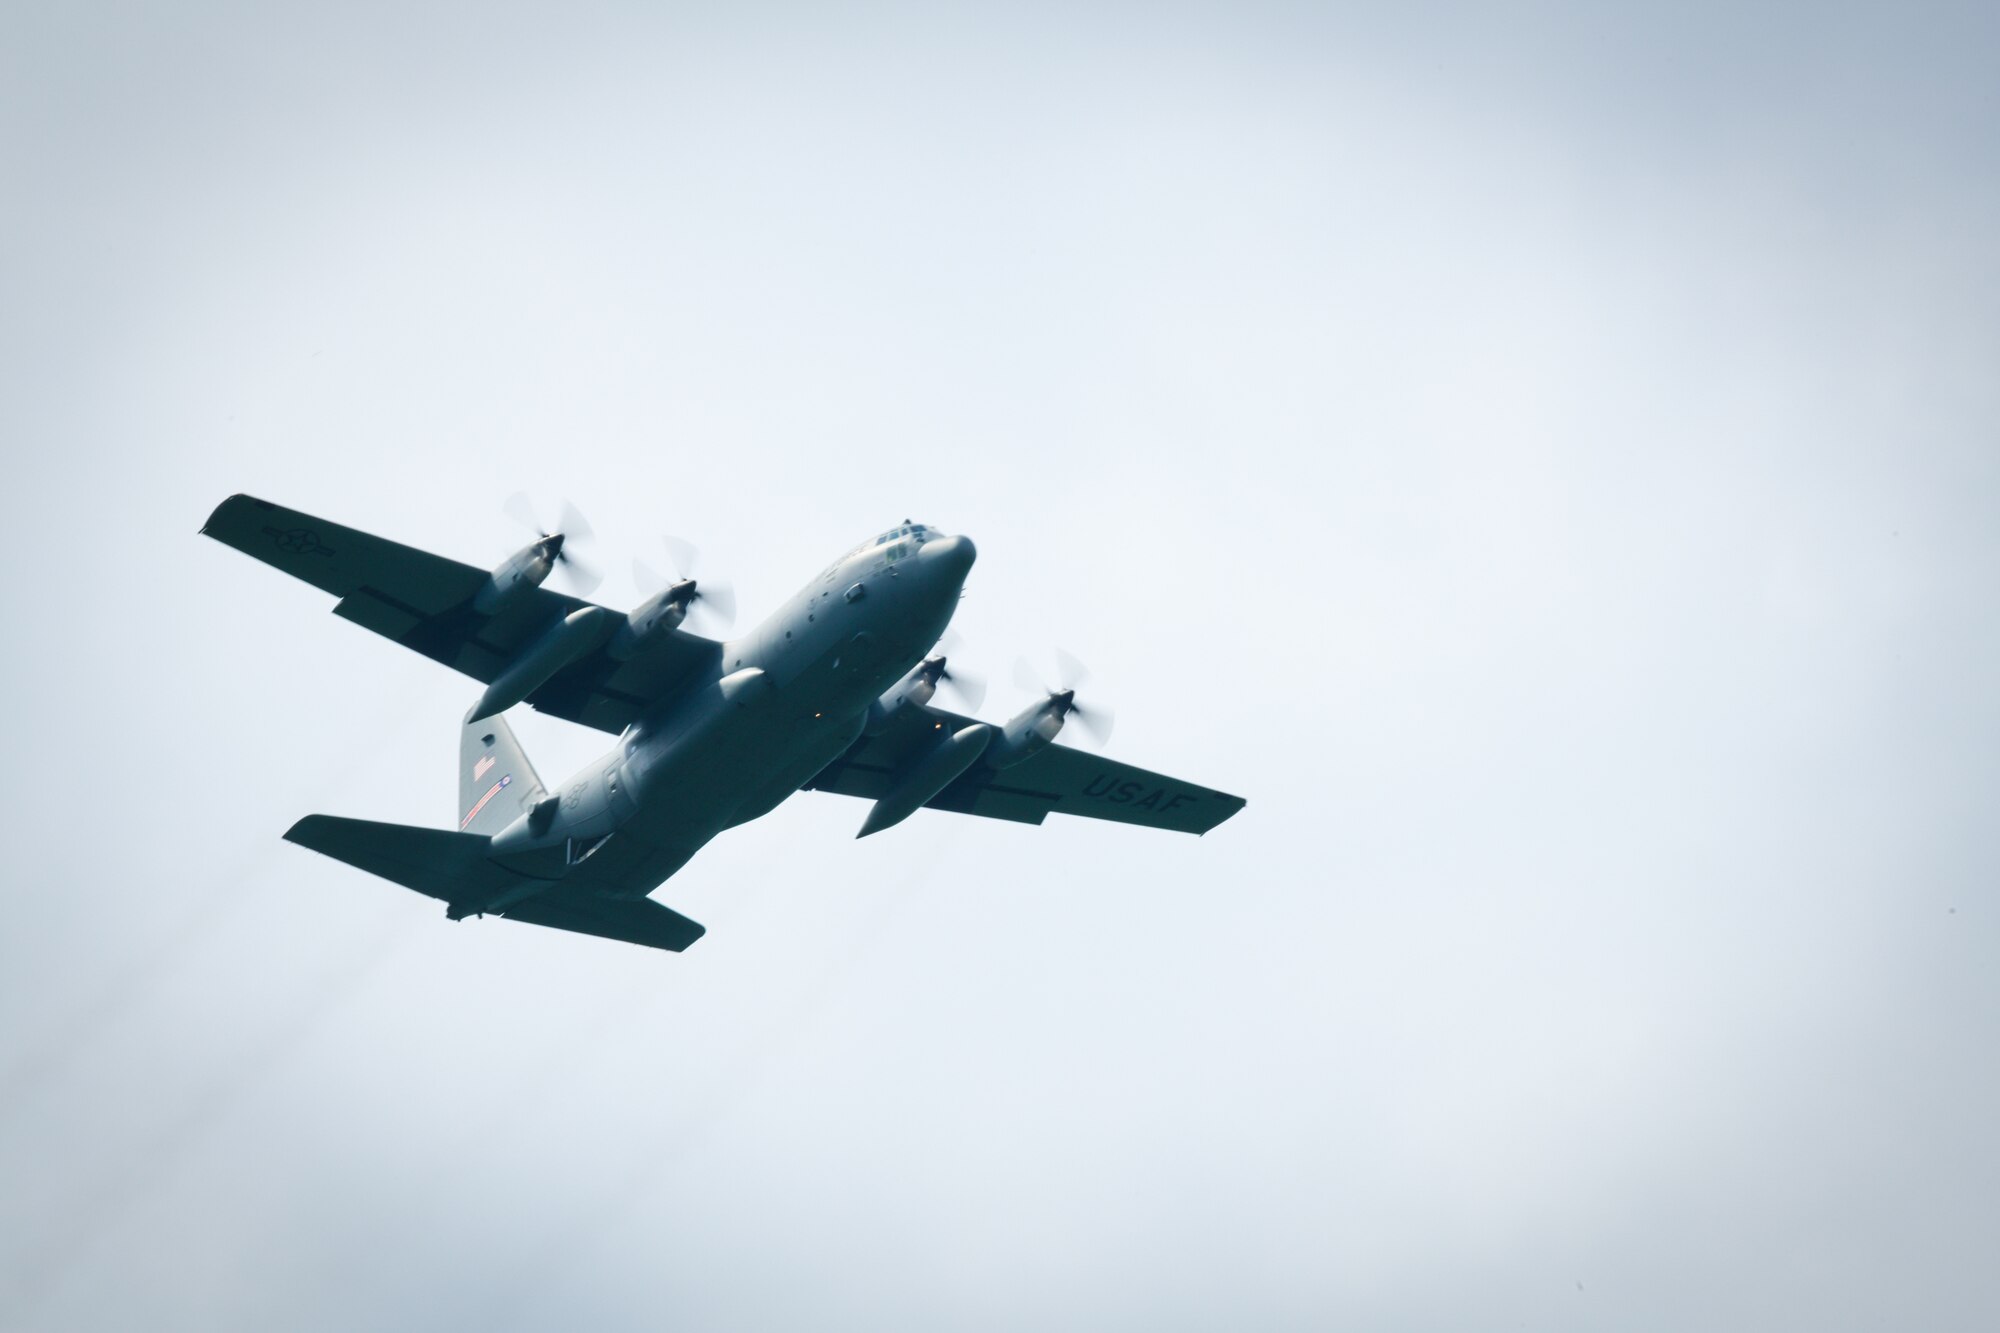 A 910th Airlift Wing C-130H Hercules flies over Camp Garfield’s drop zone for cargo drop training, July 12, 2020. The exercise provides cargo drop experience for the 757th Airlift Squadron aircrews.